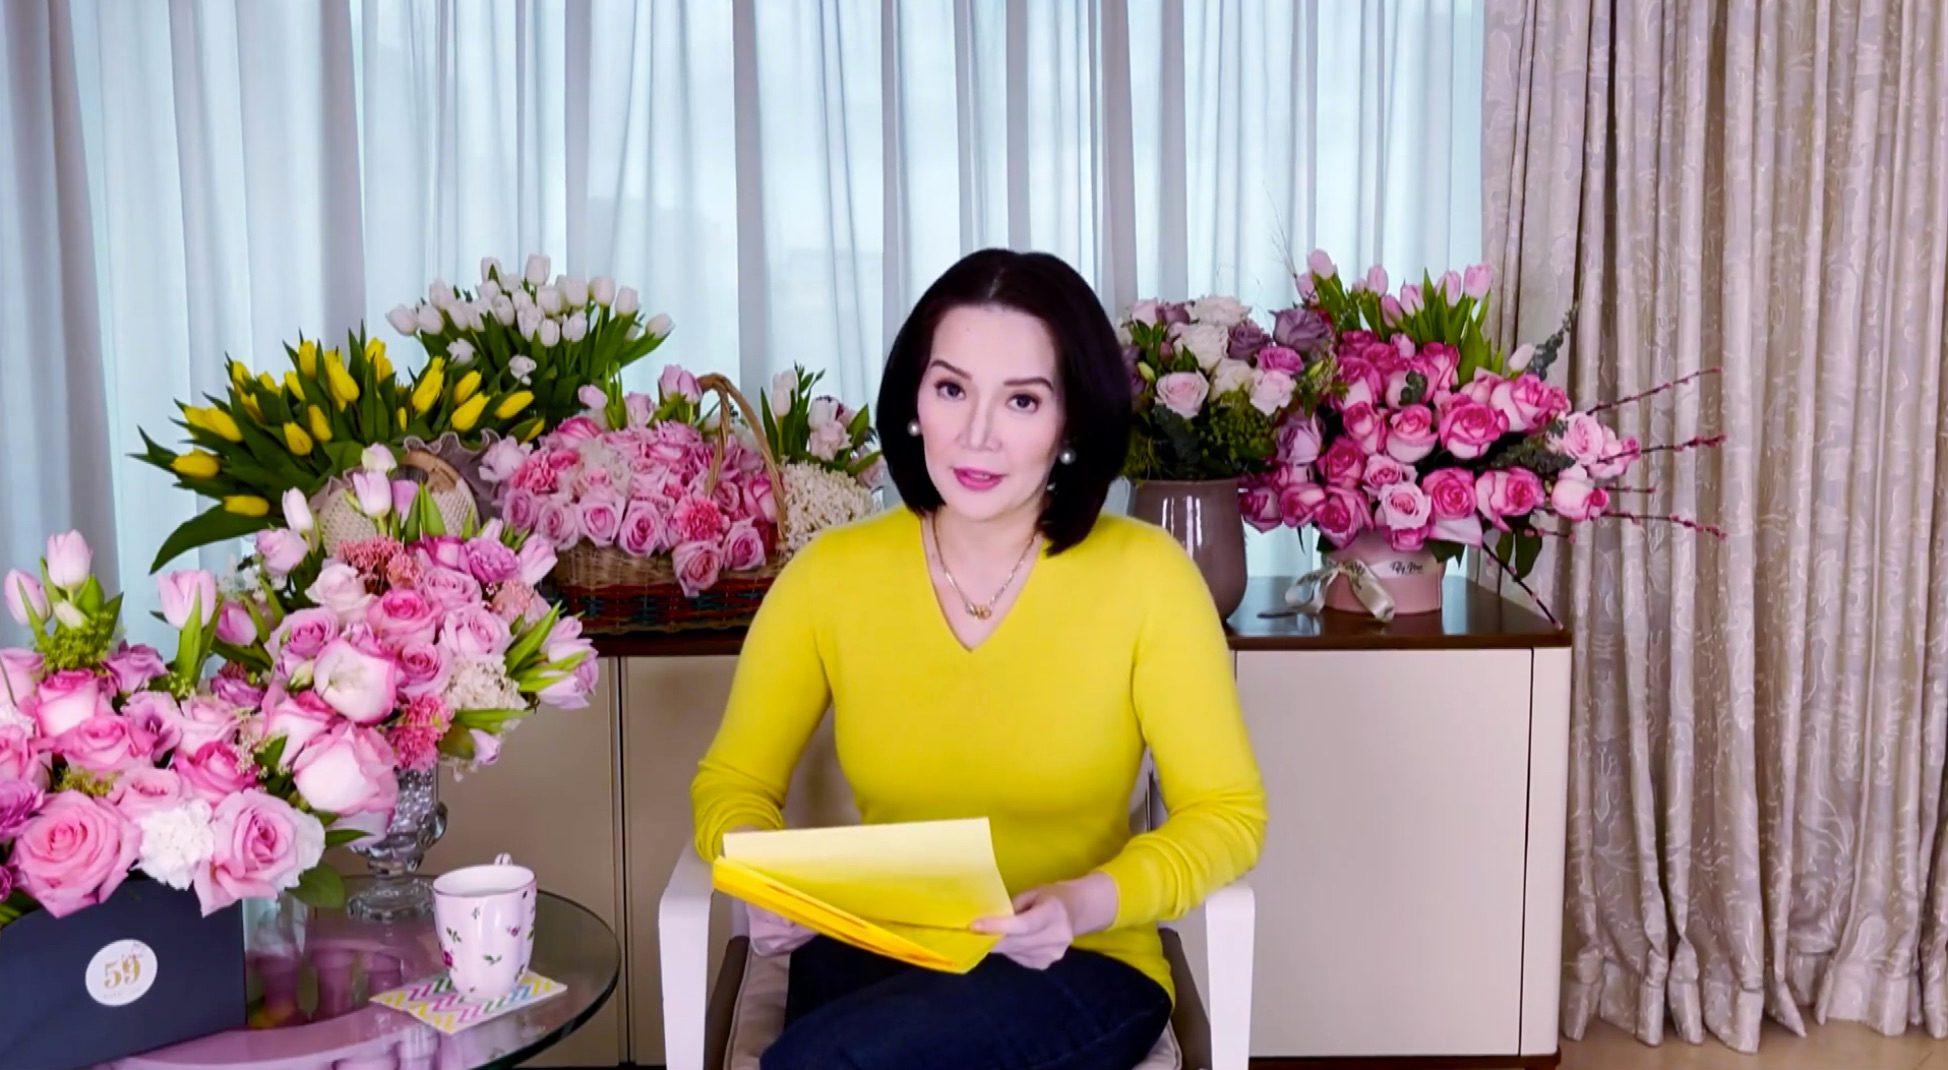 Here’s a wrap of Kris Aquino’s ‘tell-all’ video